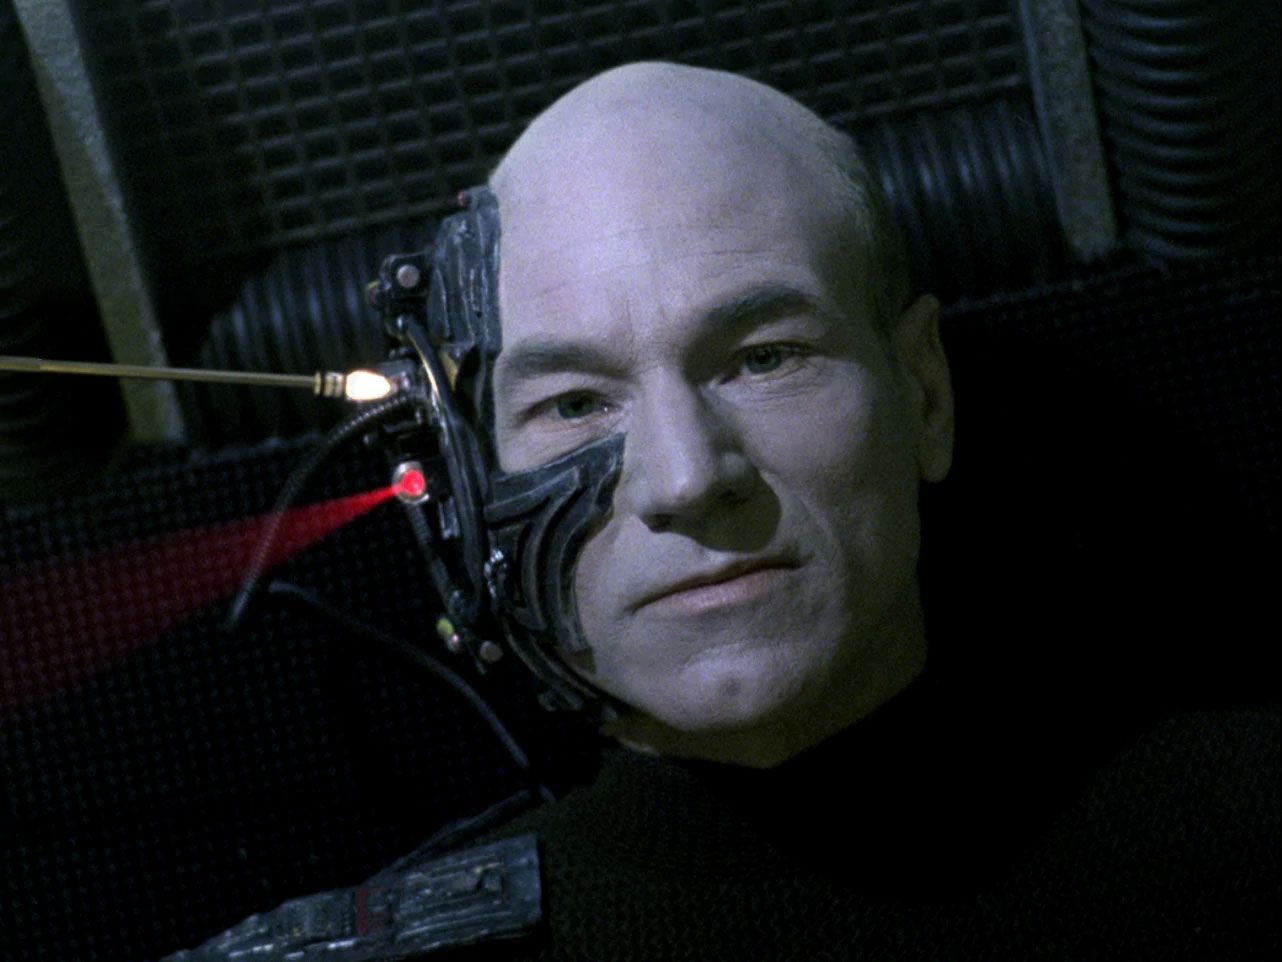 Photo of Jean-Luc Picard in Locutus of Borg form